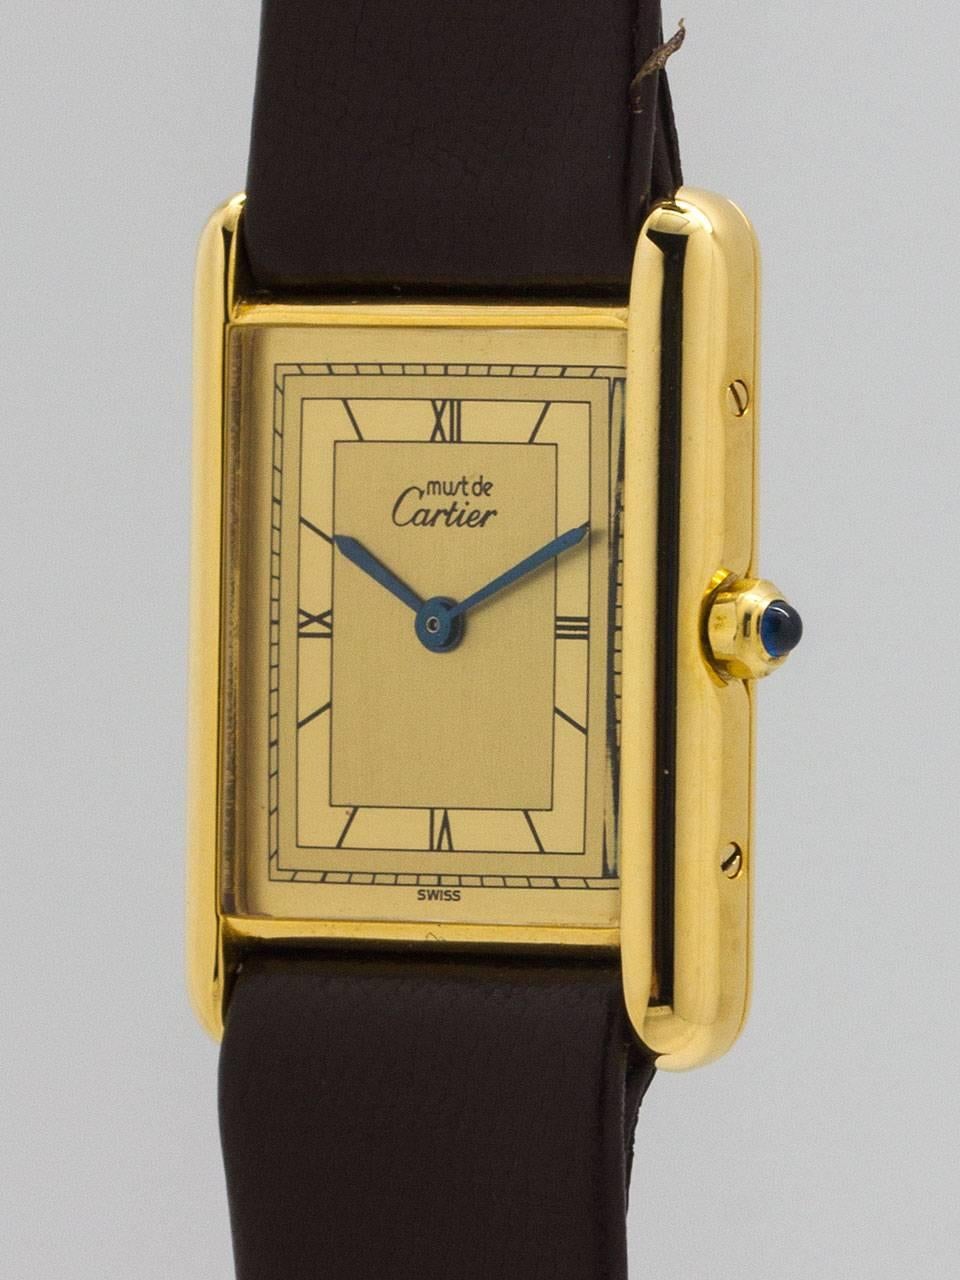 
Cartier Man’s Tank Louis vermeil (20 microns gold over silver) 26 X 31mm case secured by screws on side and back circa 2000. With unusual 2 tone cream dial with fine Roman figures and blued steel hands and blue sapphire cabachon crown. Battery